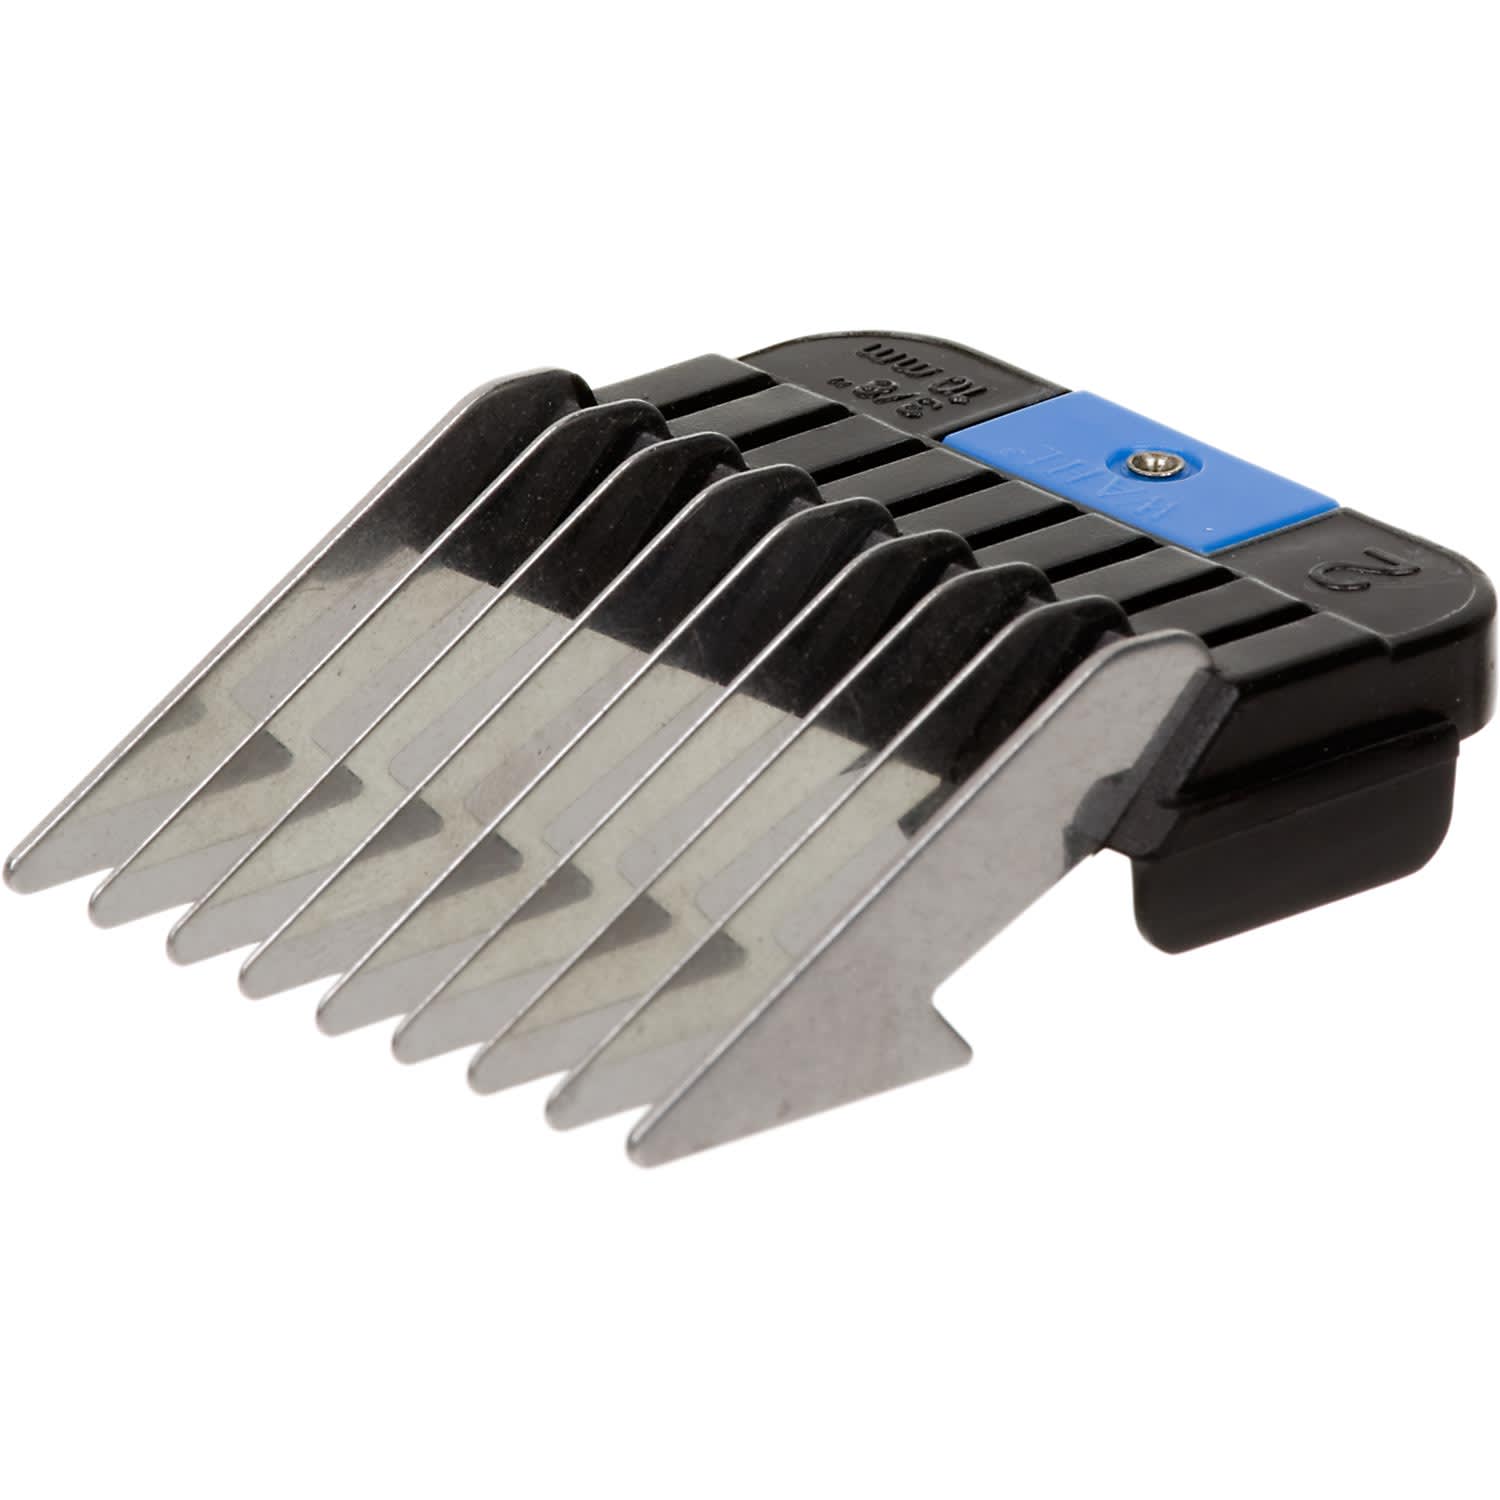 Wahl Stainless Steel Attachment Guide Combs, #2 | Petco Wahl Stainless Steel Attachment Guide Combs